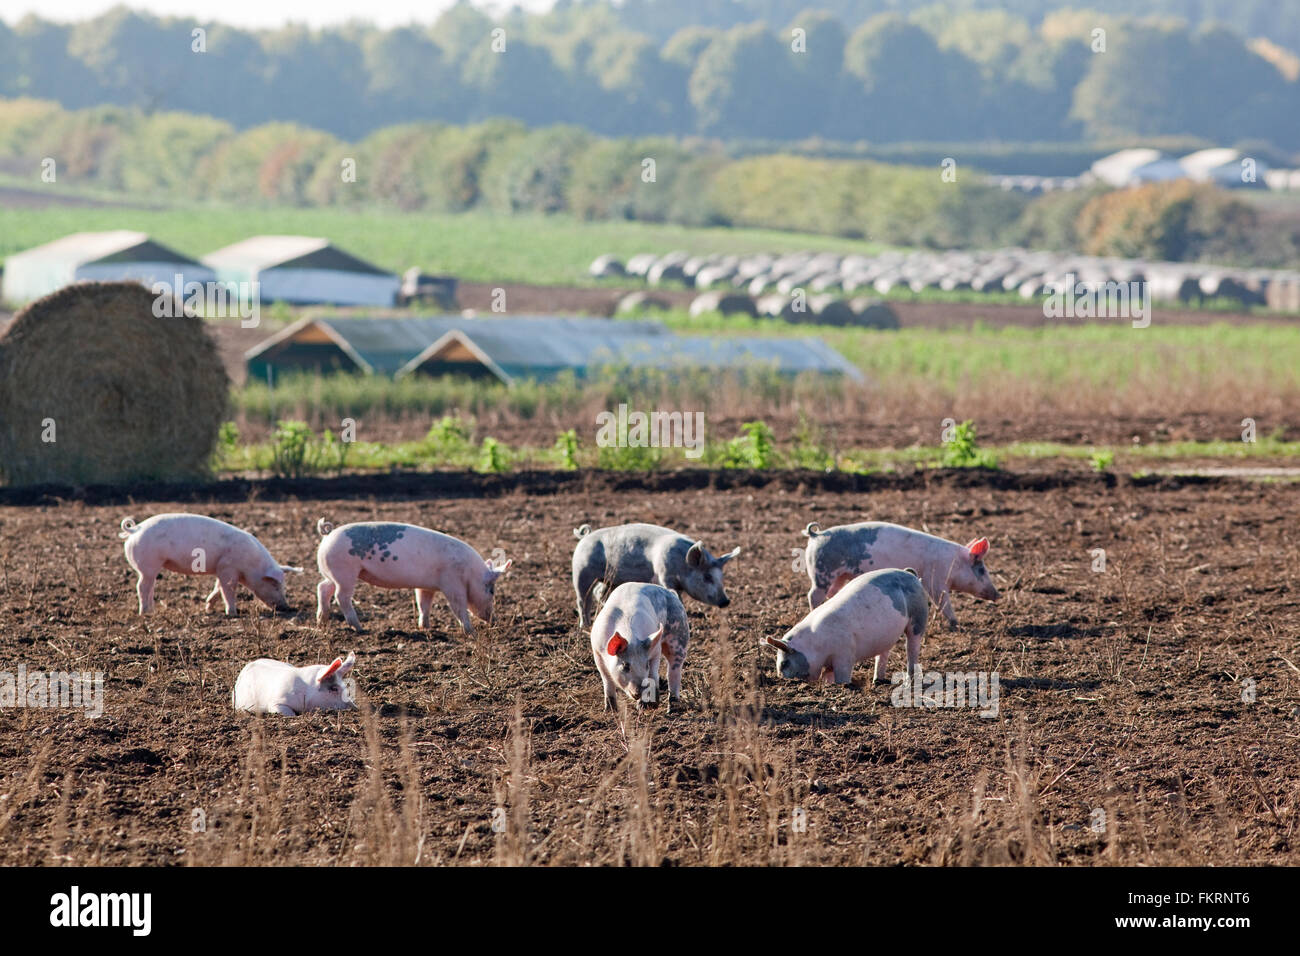 Pig Farm. Domestic animals (Sus scrofa). Outdoor, free range enclosure. Pigs contained by electric fence wires and straw bales. Stock Photo